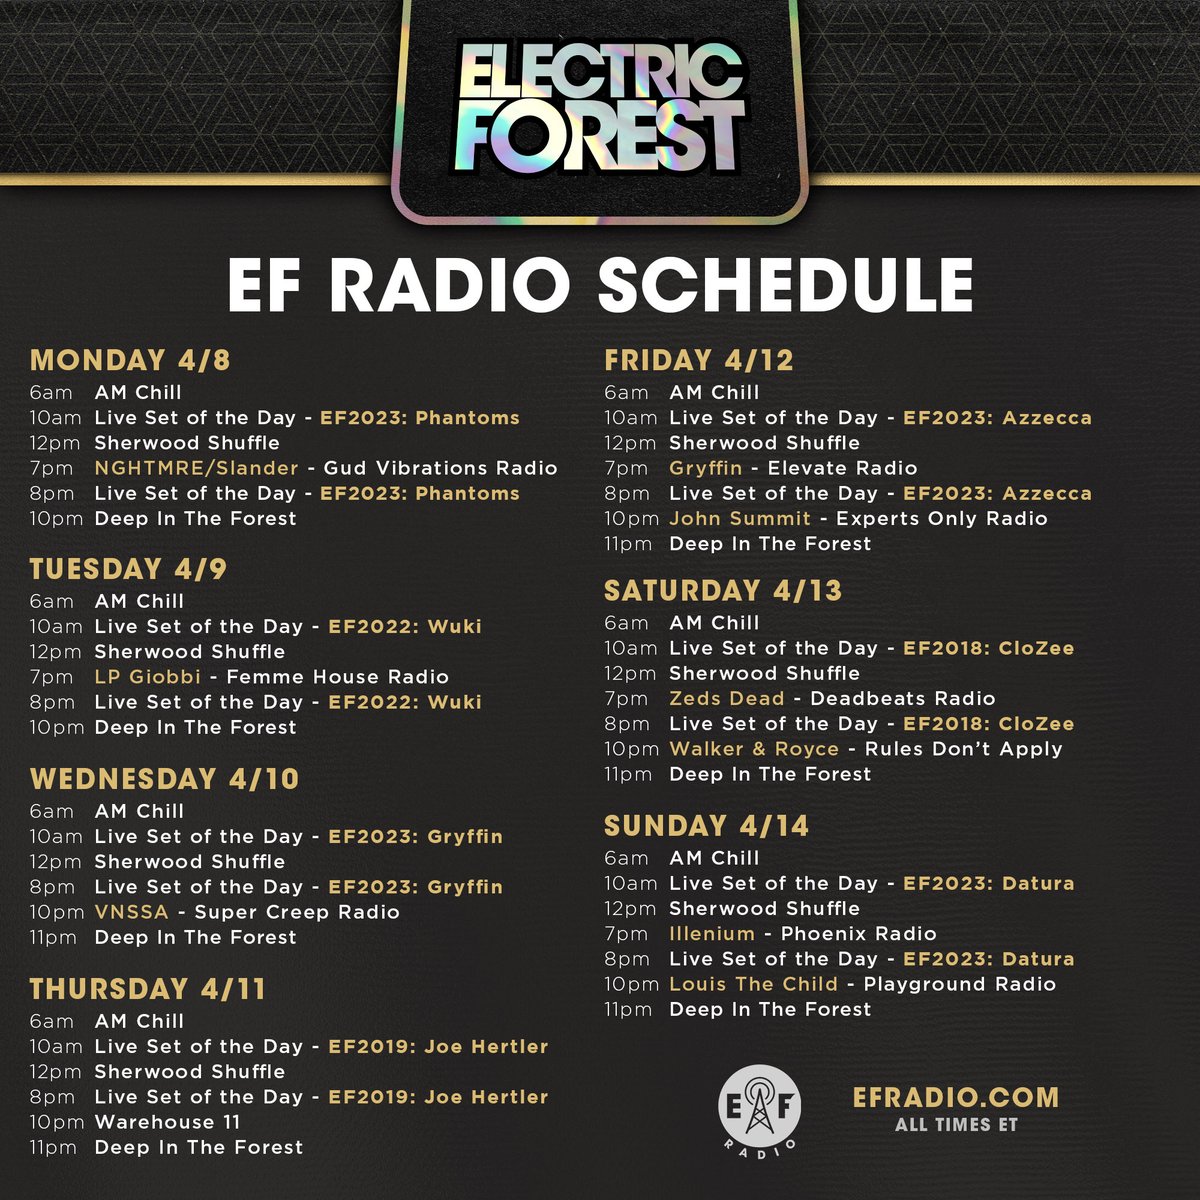 This week on EF Radio! 📻🌲 Tune in for #EF2023 performances from @phantoms, @gryffinofficial and others, as well as daily broadcasts of the AM Chill and Sherwood Shuffle, and so much more. Hear it 24/7/365 at EFRadio.com, in the Mobile App, or on Discord!